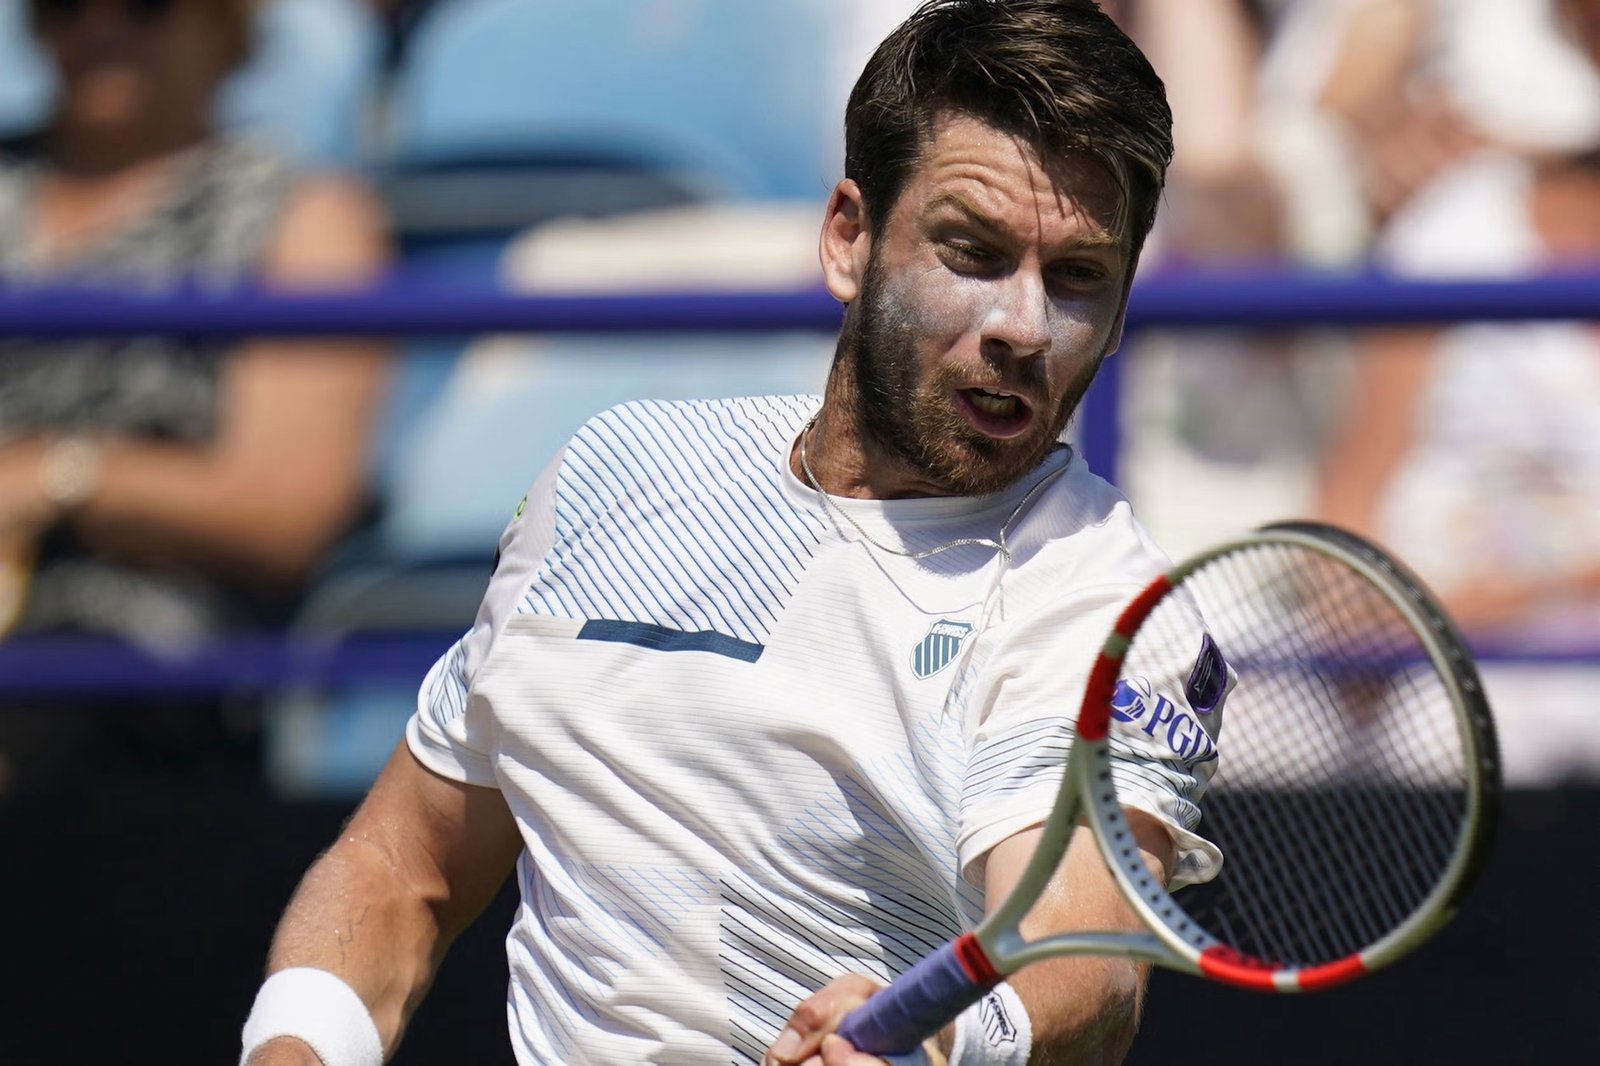 Cameron Norrie Suffers First-Round Exit at Eastbourne